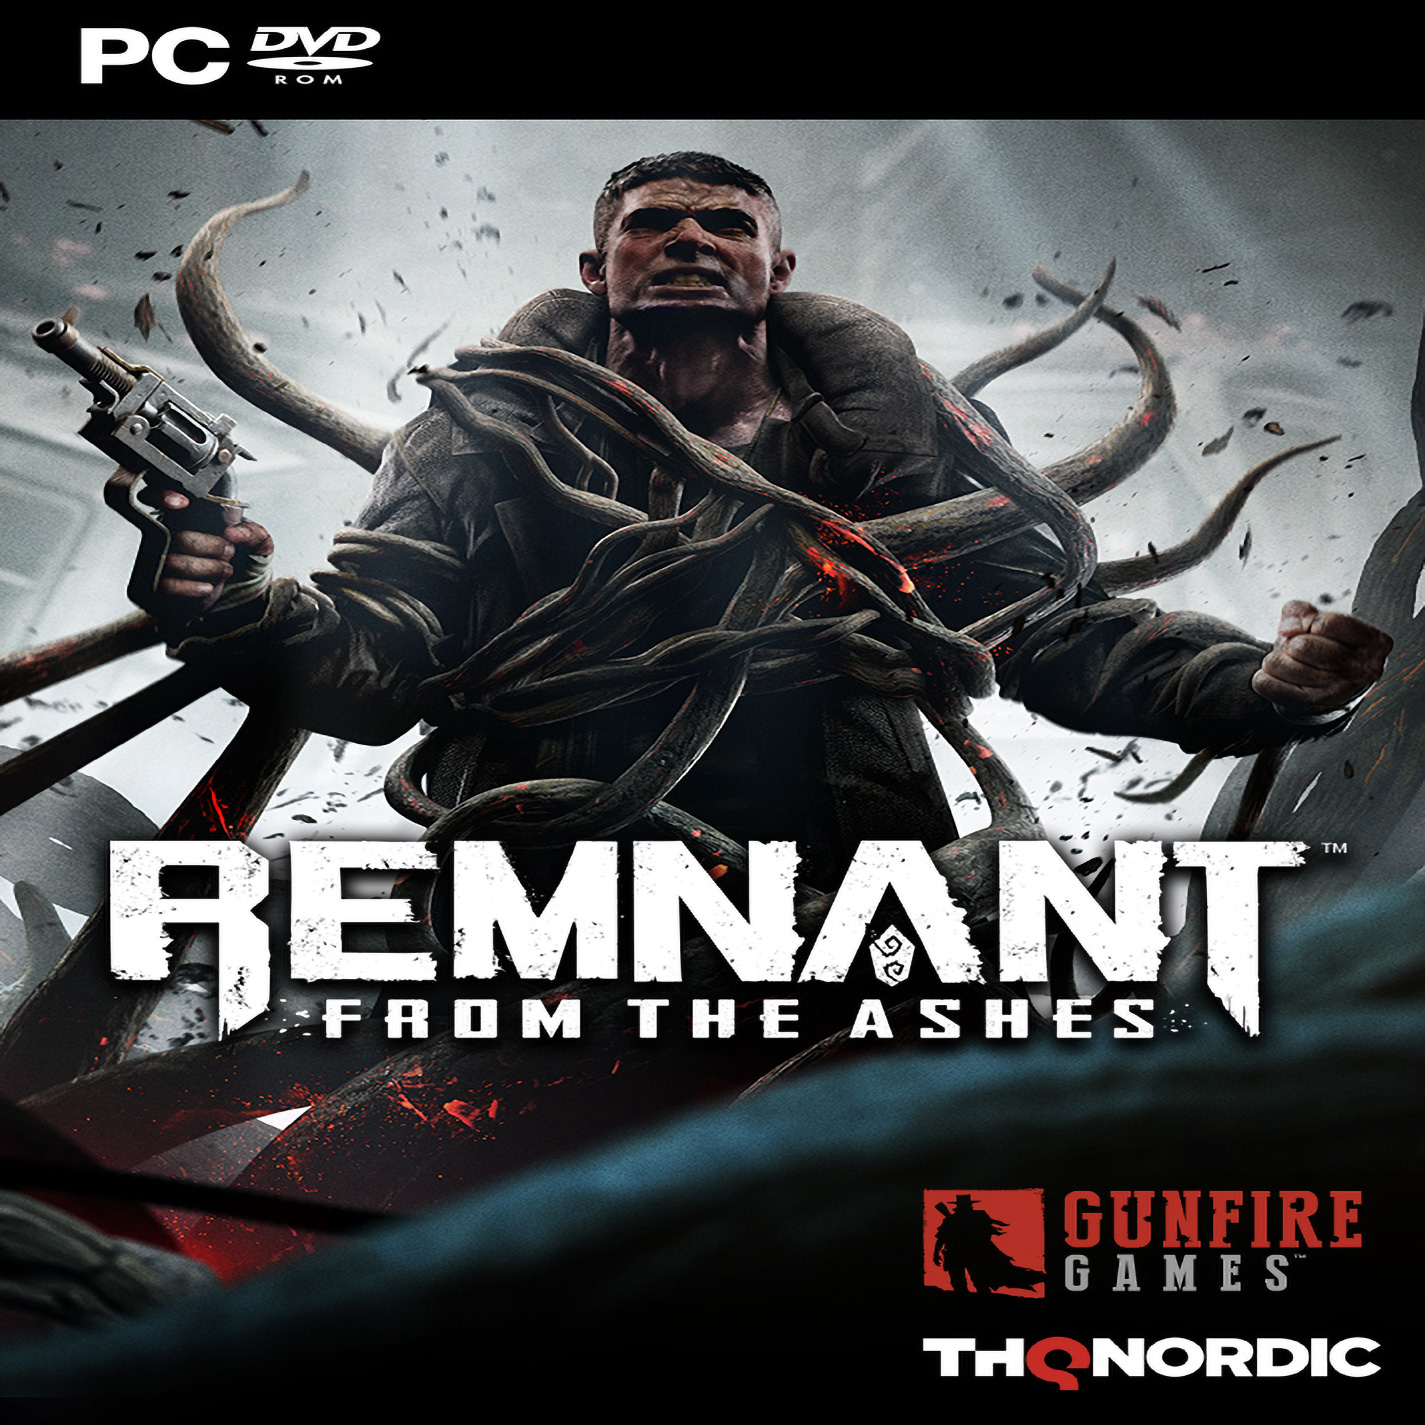 Remnant: From the Ashes - predn CD obal